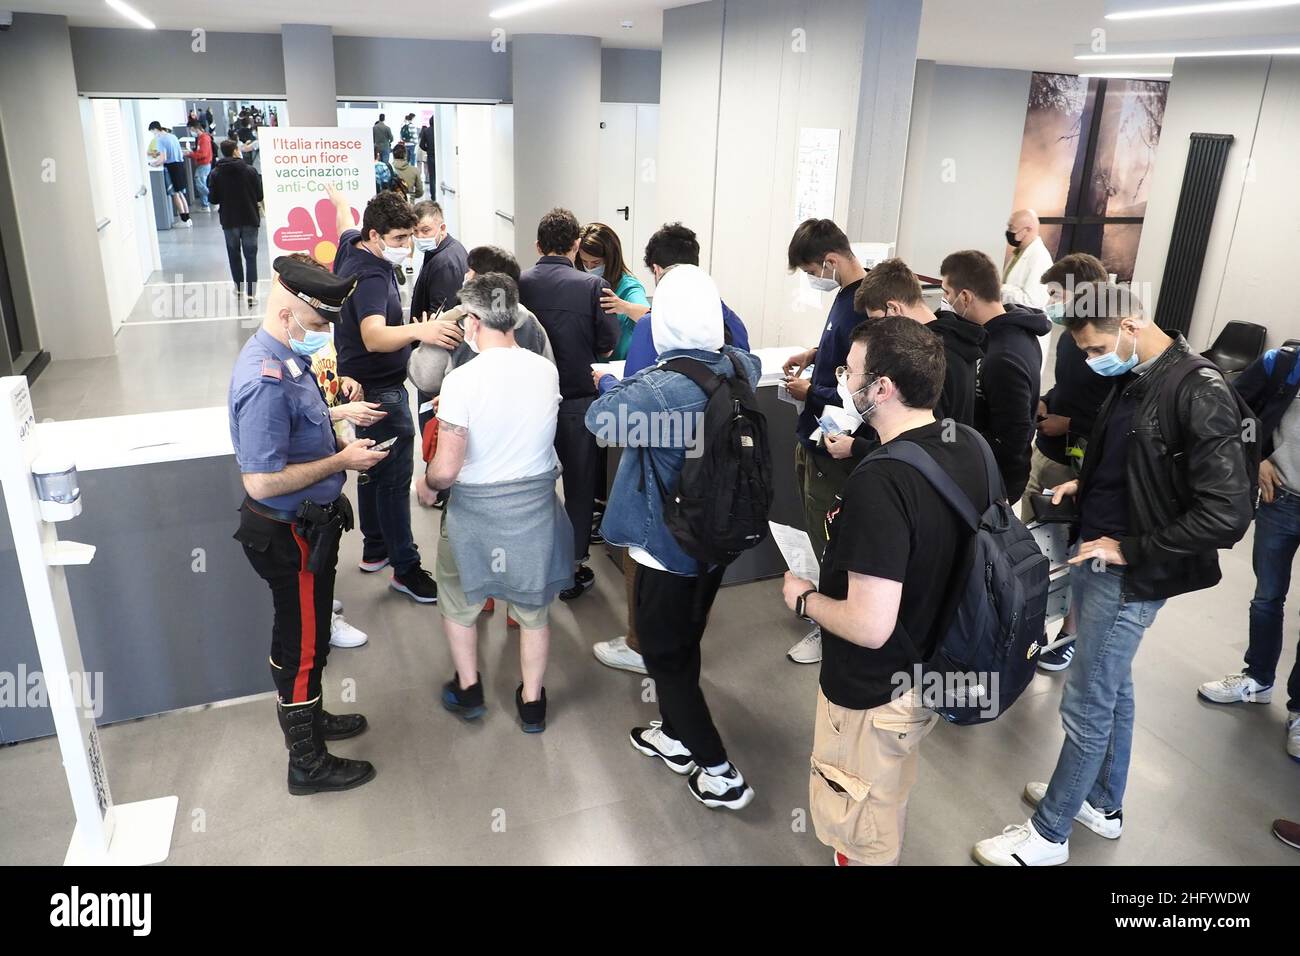 Michele Nucci/LaPresse June 2, 2021 - Bologna, Italynews Coronavirus Bologna, open day vaccinations at the hub of the fair in the pic: Queue for anti-covid vaccinations at the hub of the fair on the first open-day vaccine without reservation for young, adolescents and teenagers Stock Photo